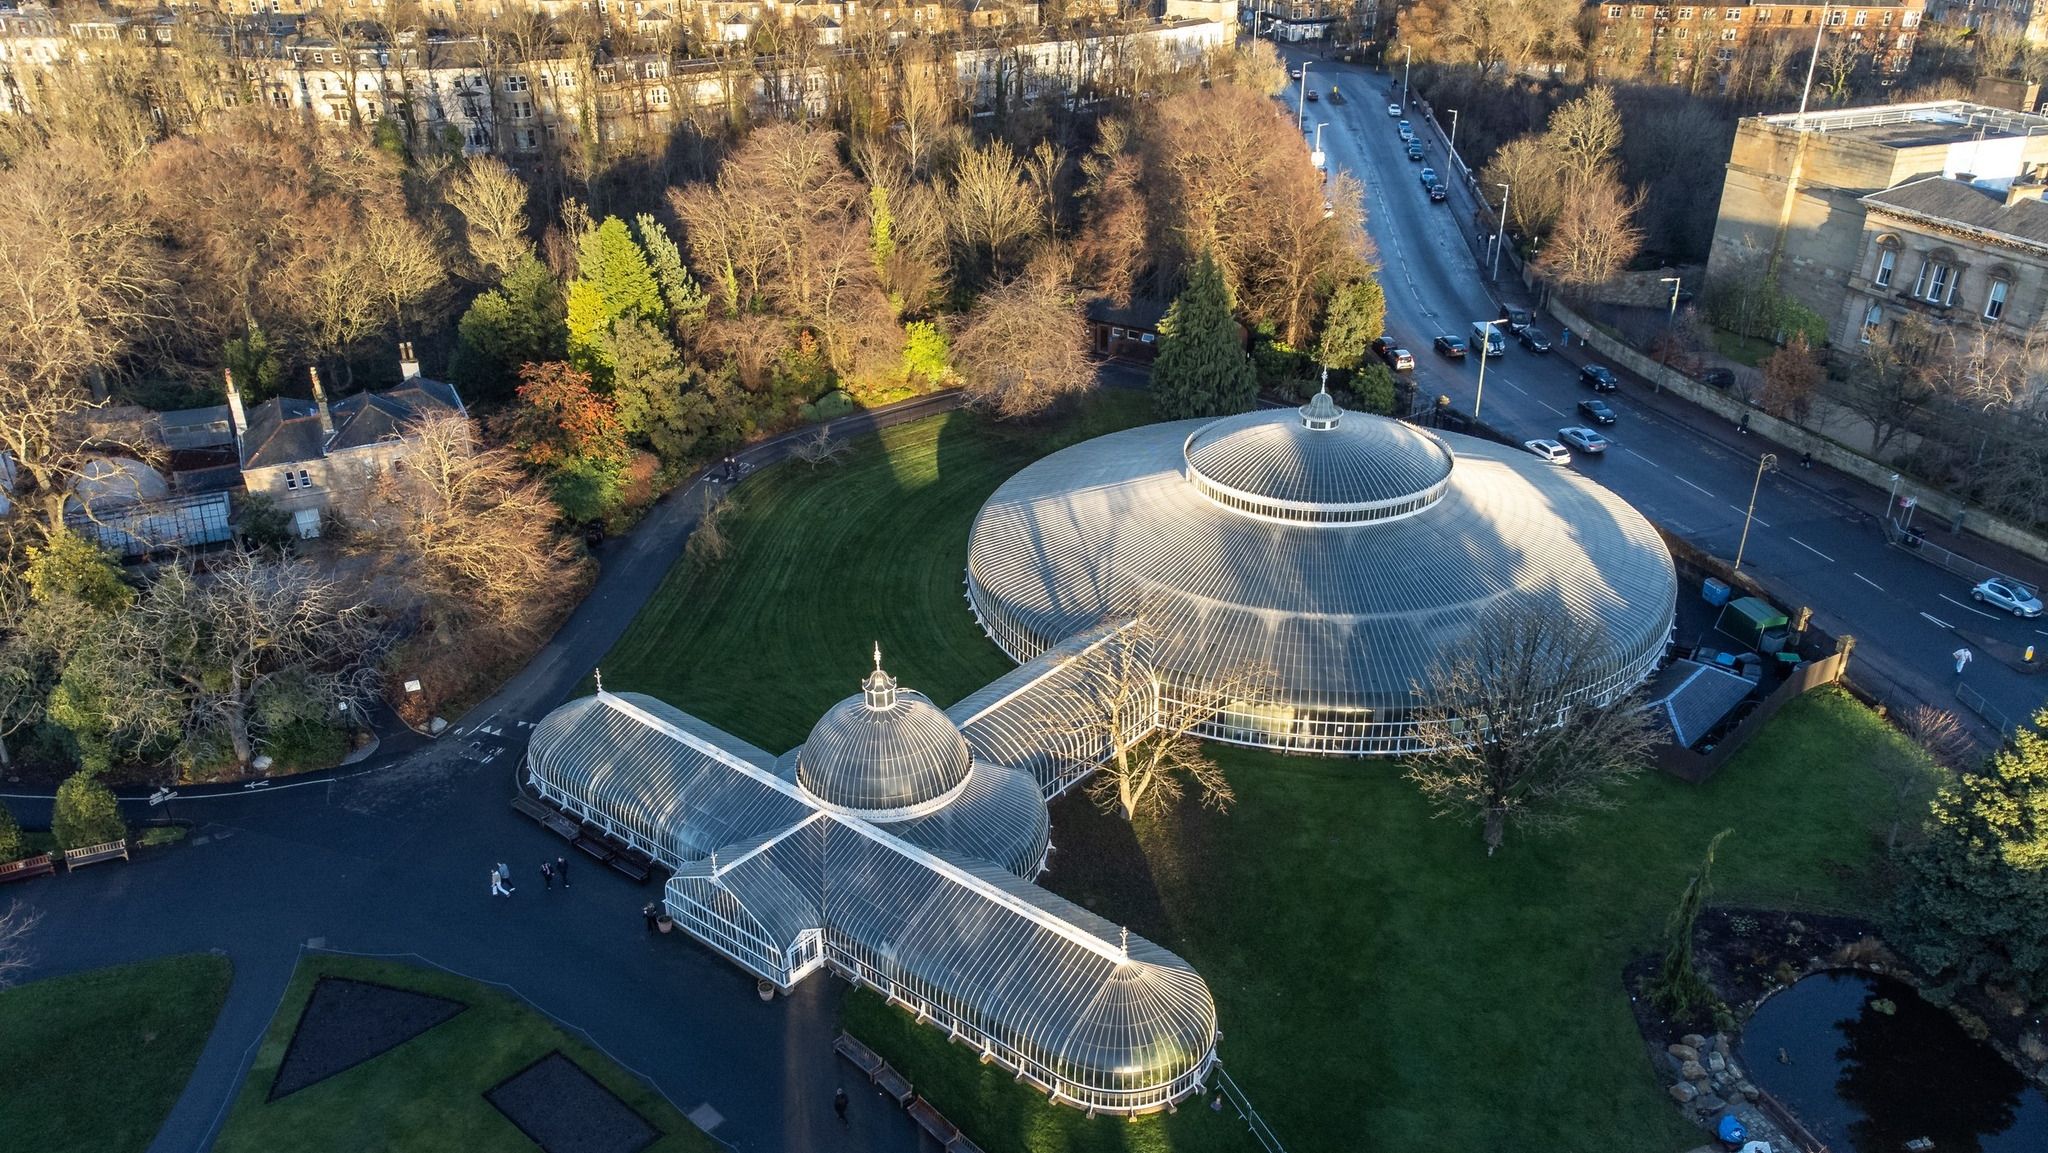 Aerial view of Kibble Palace in the Botanic Gardens in Glasgow